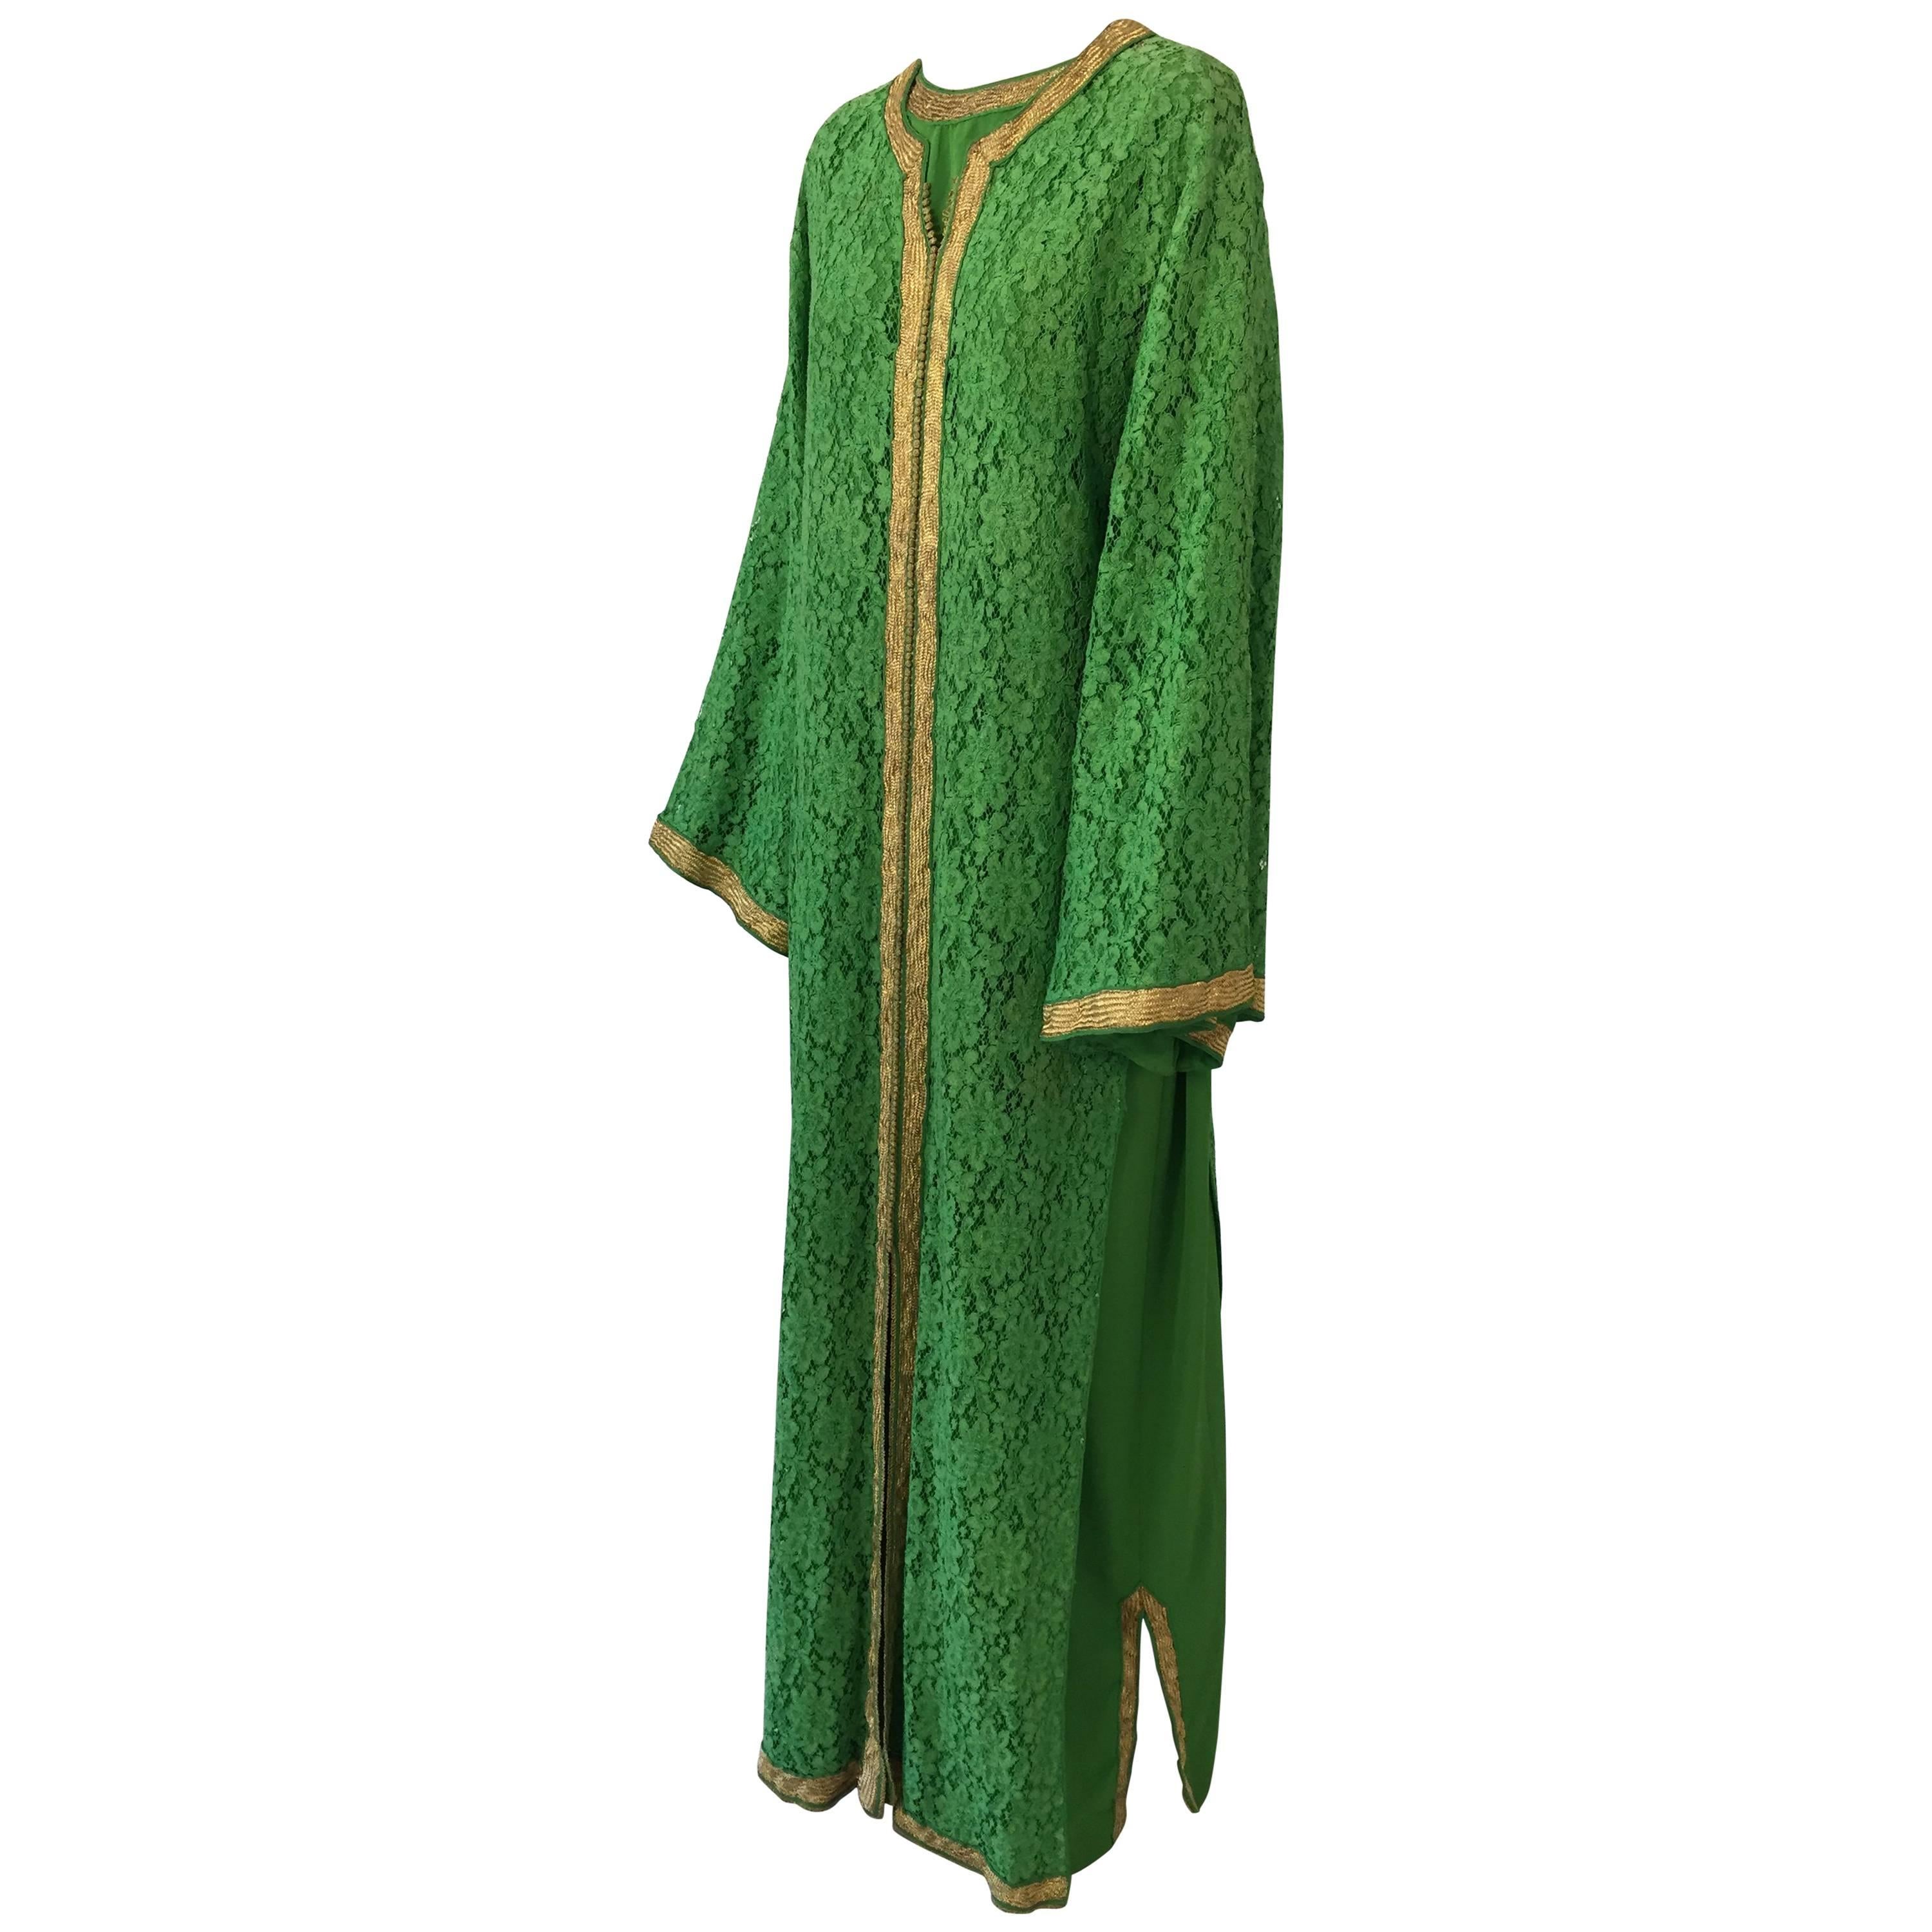 Moroccan Emerald Green Lace and Gold Trim Caftan Set